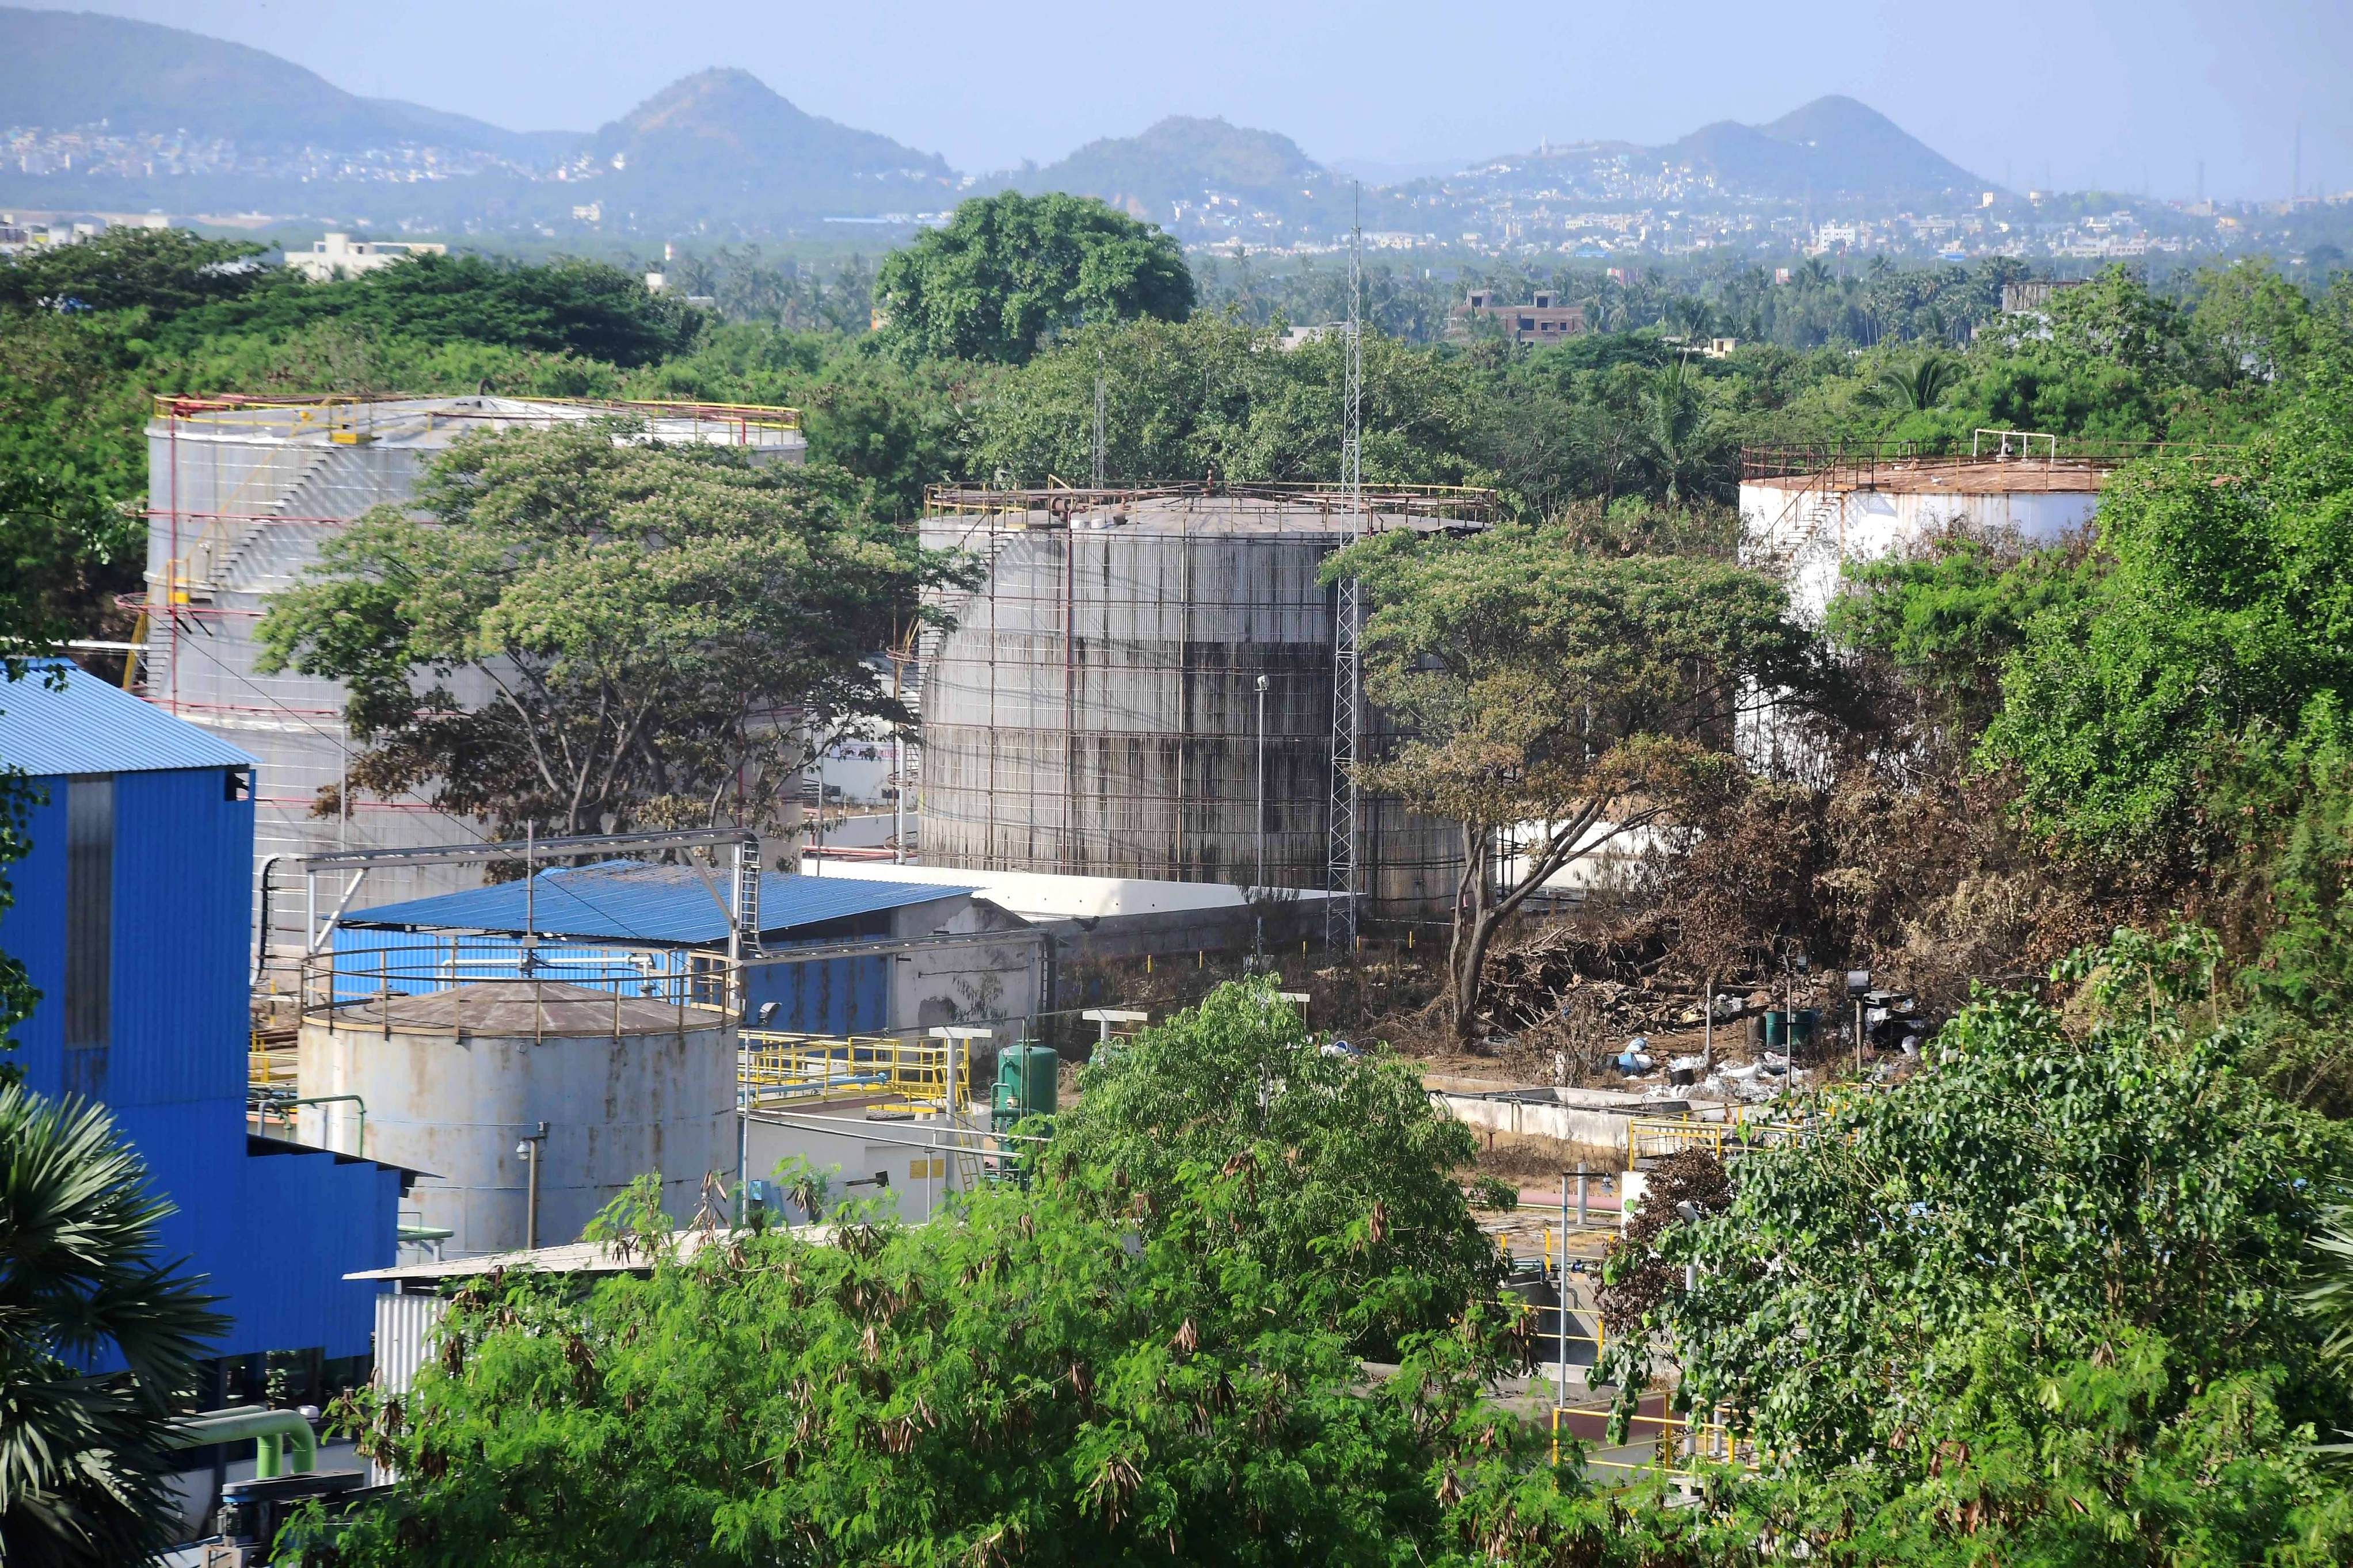 A view of the LG Polymers plant, a day after the major chemical gas leak incident, in RR Venkatapuram village in Visakhapatnam. Credit: PTIRepresentative image. Credit: PTI